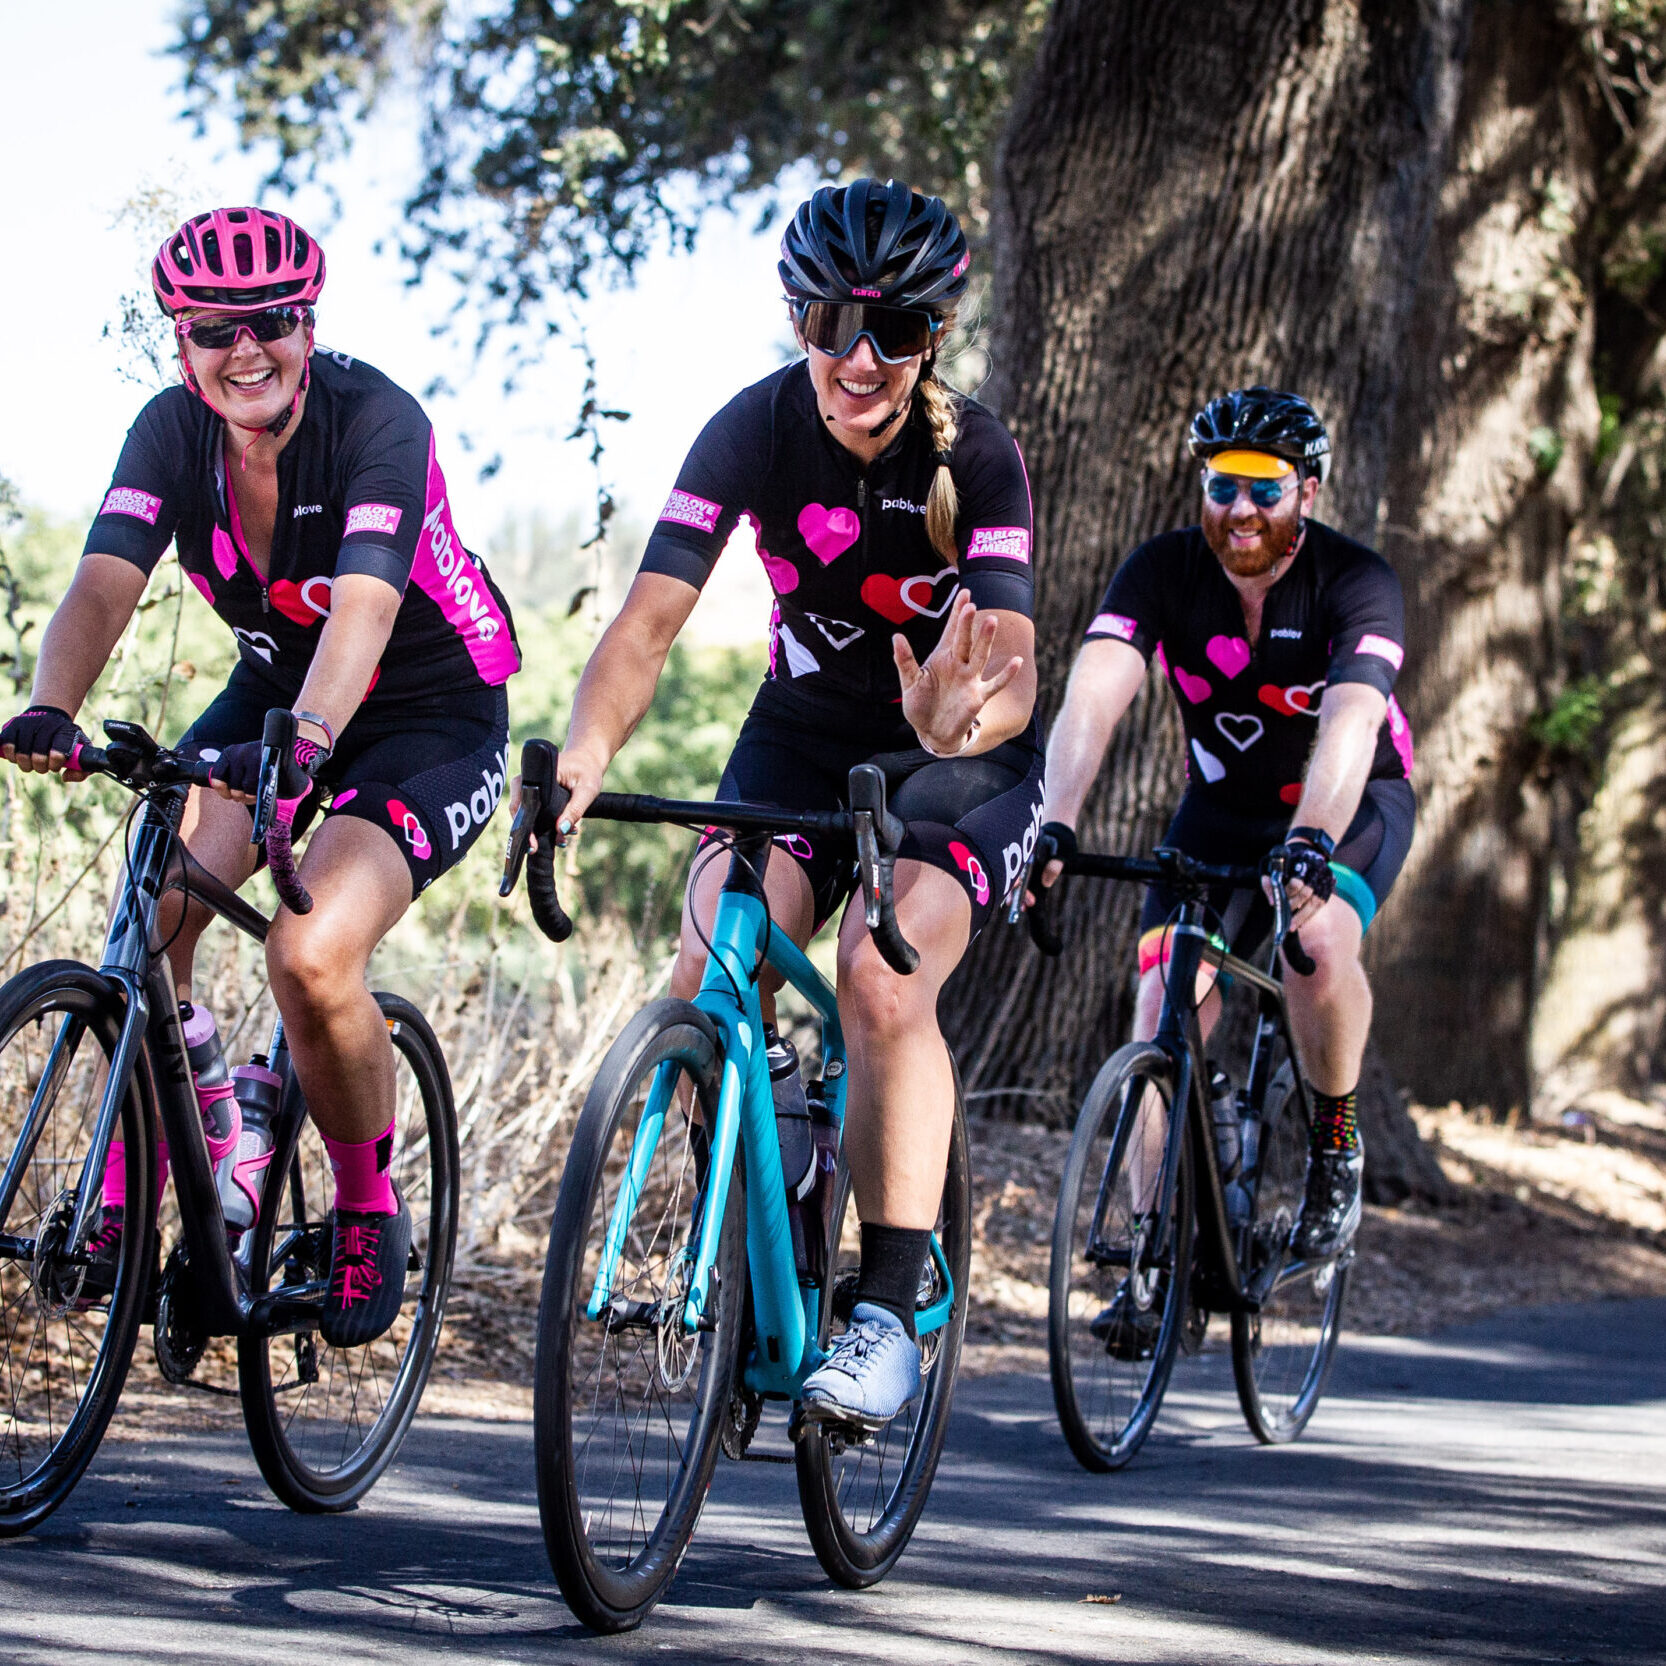 VISALIA, CA - OCTOBER 2: Day 4 of the Pablove Across America ride on October 2, 2019 in Visalia, California. (Photo by Jonathan Devich/epicimages.us)